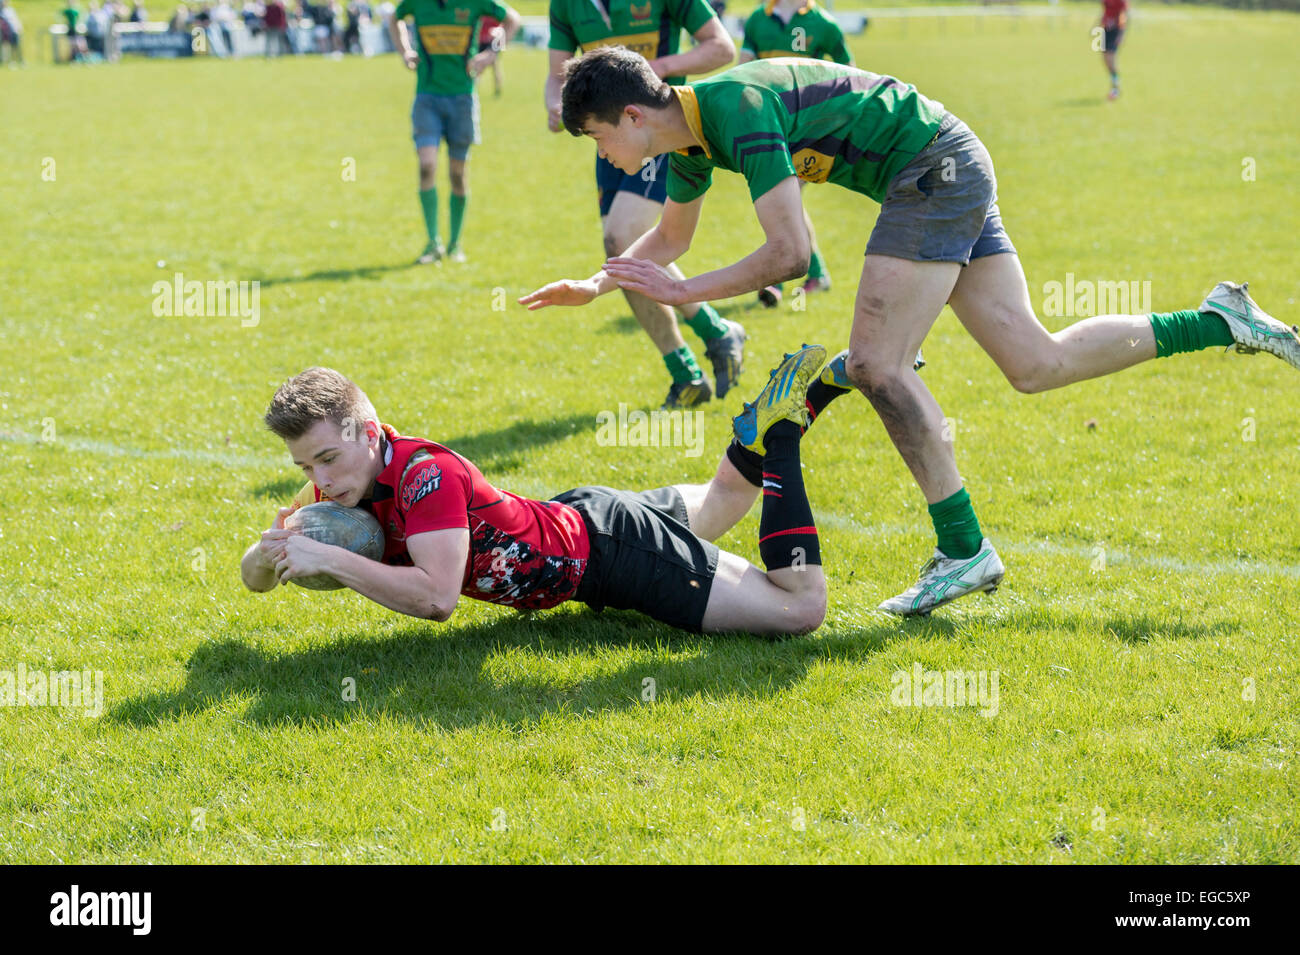 Rugby player scoring try. Stock Photo